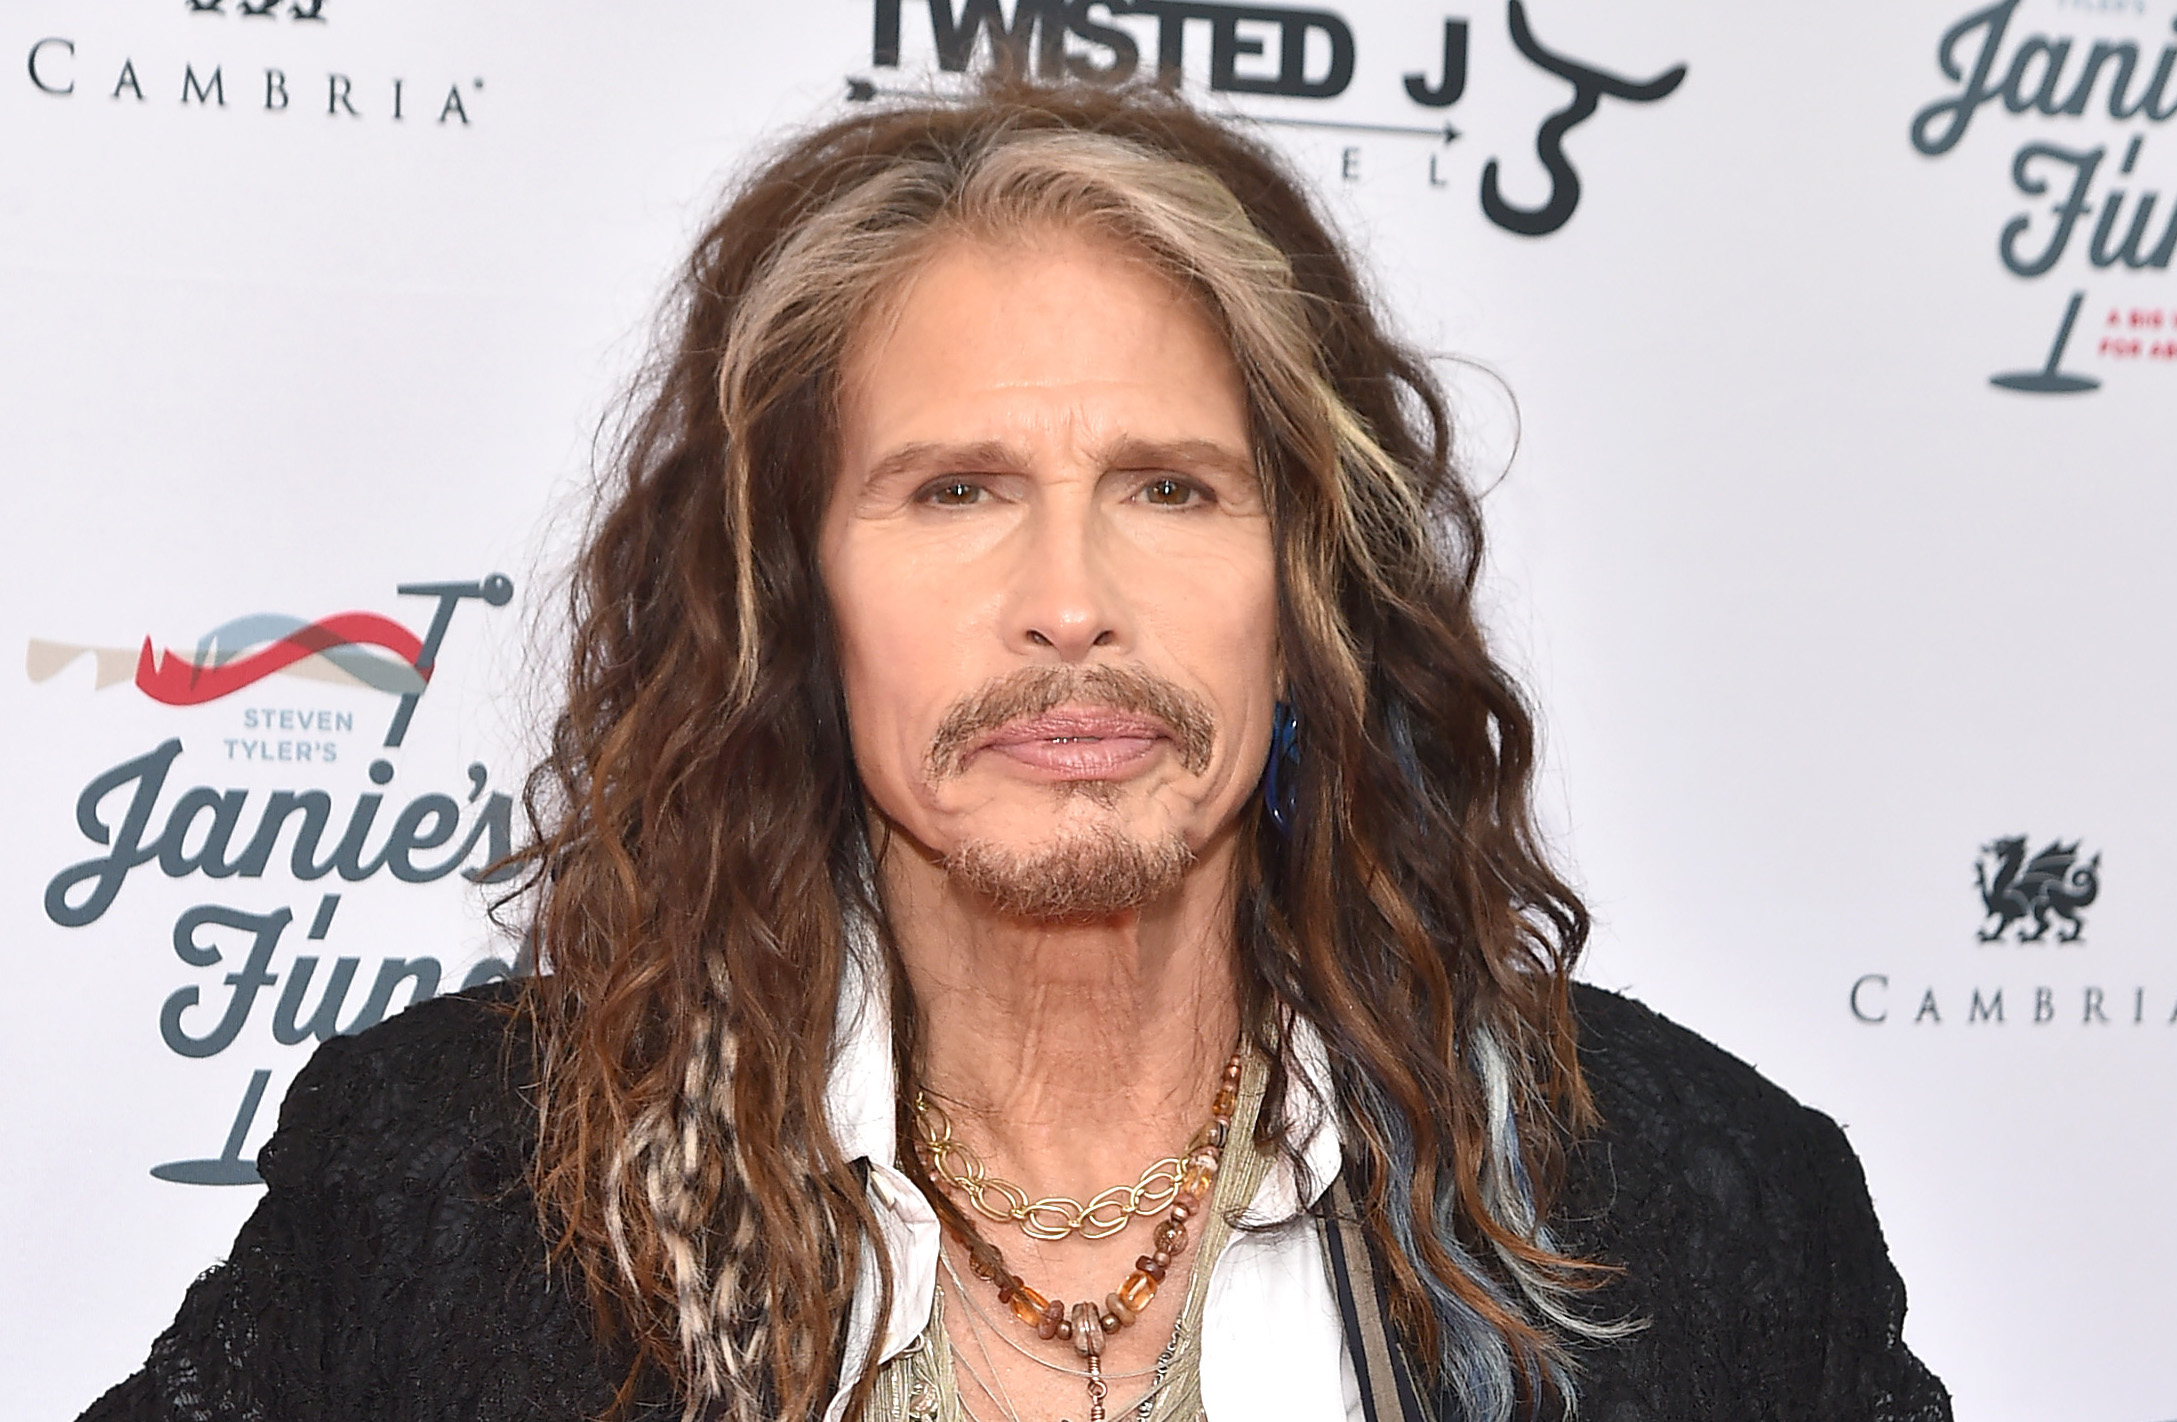 Aerosmith’s Steven Tyler Accused Of Child Sexual Abuse In New Lawsuit